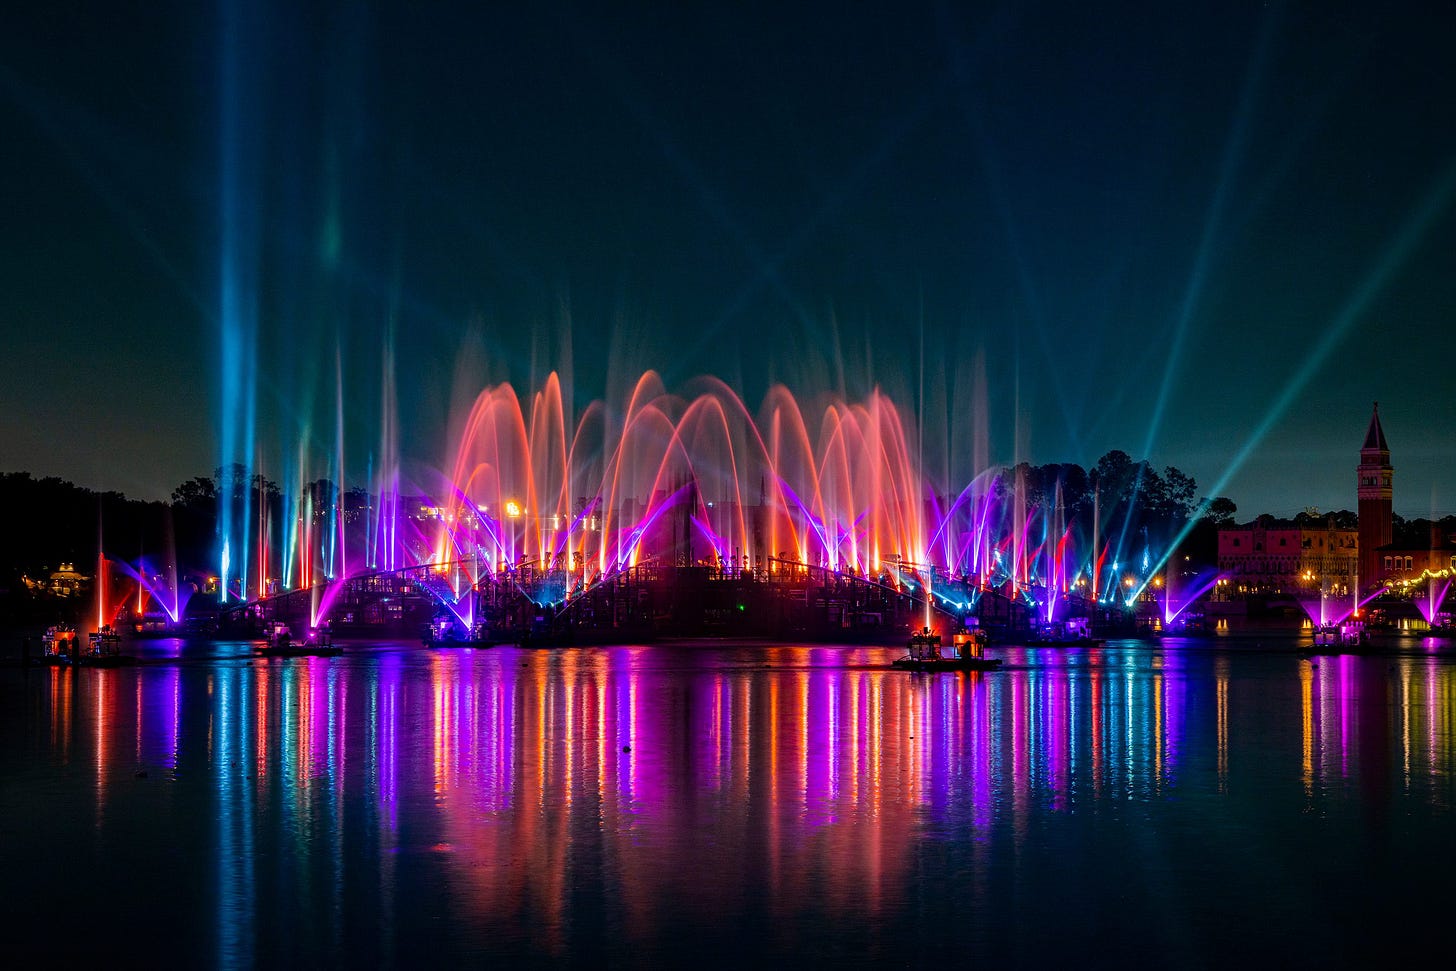 Luminous The Symphony of Us colorful fountains